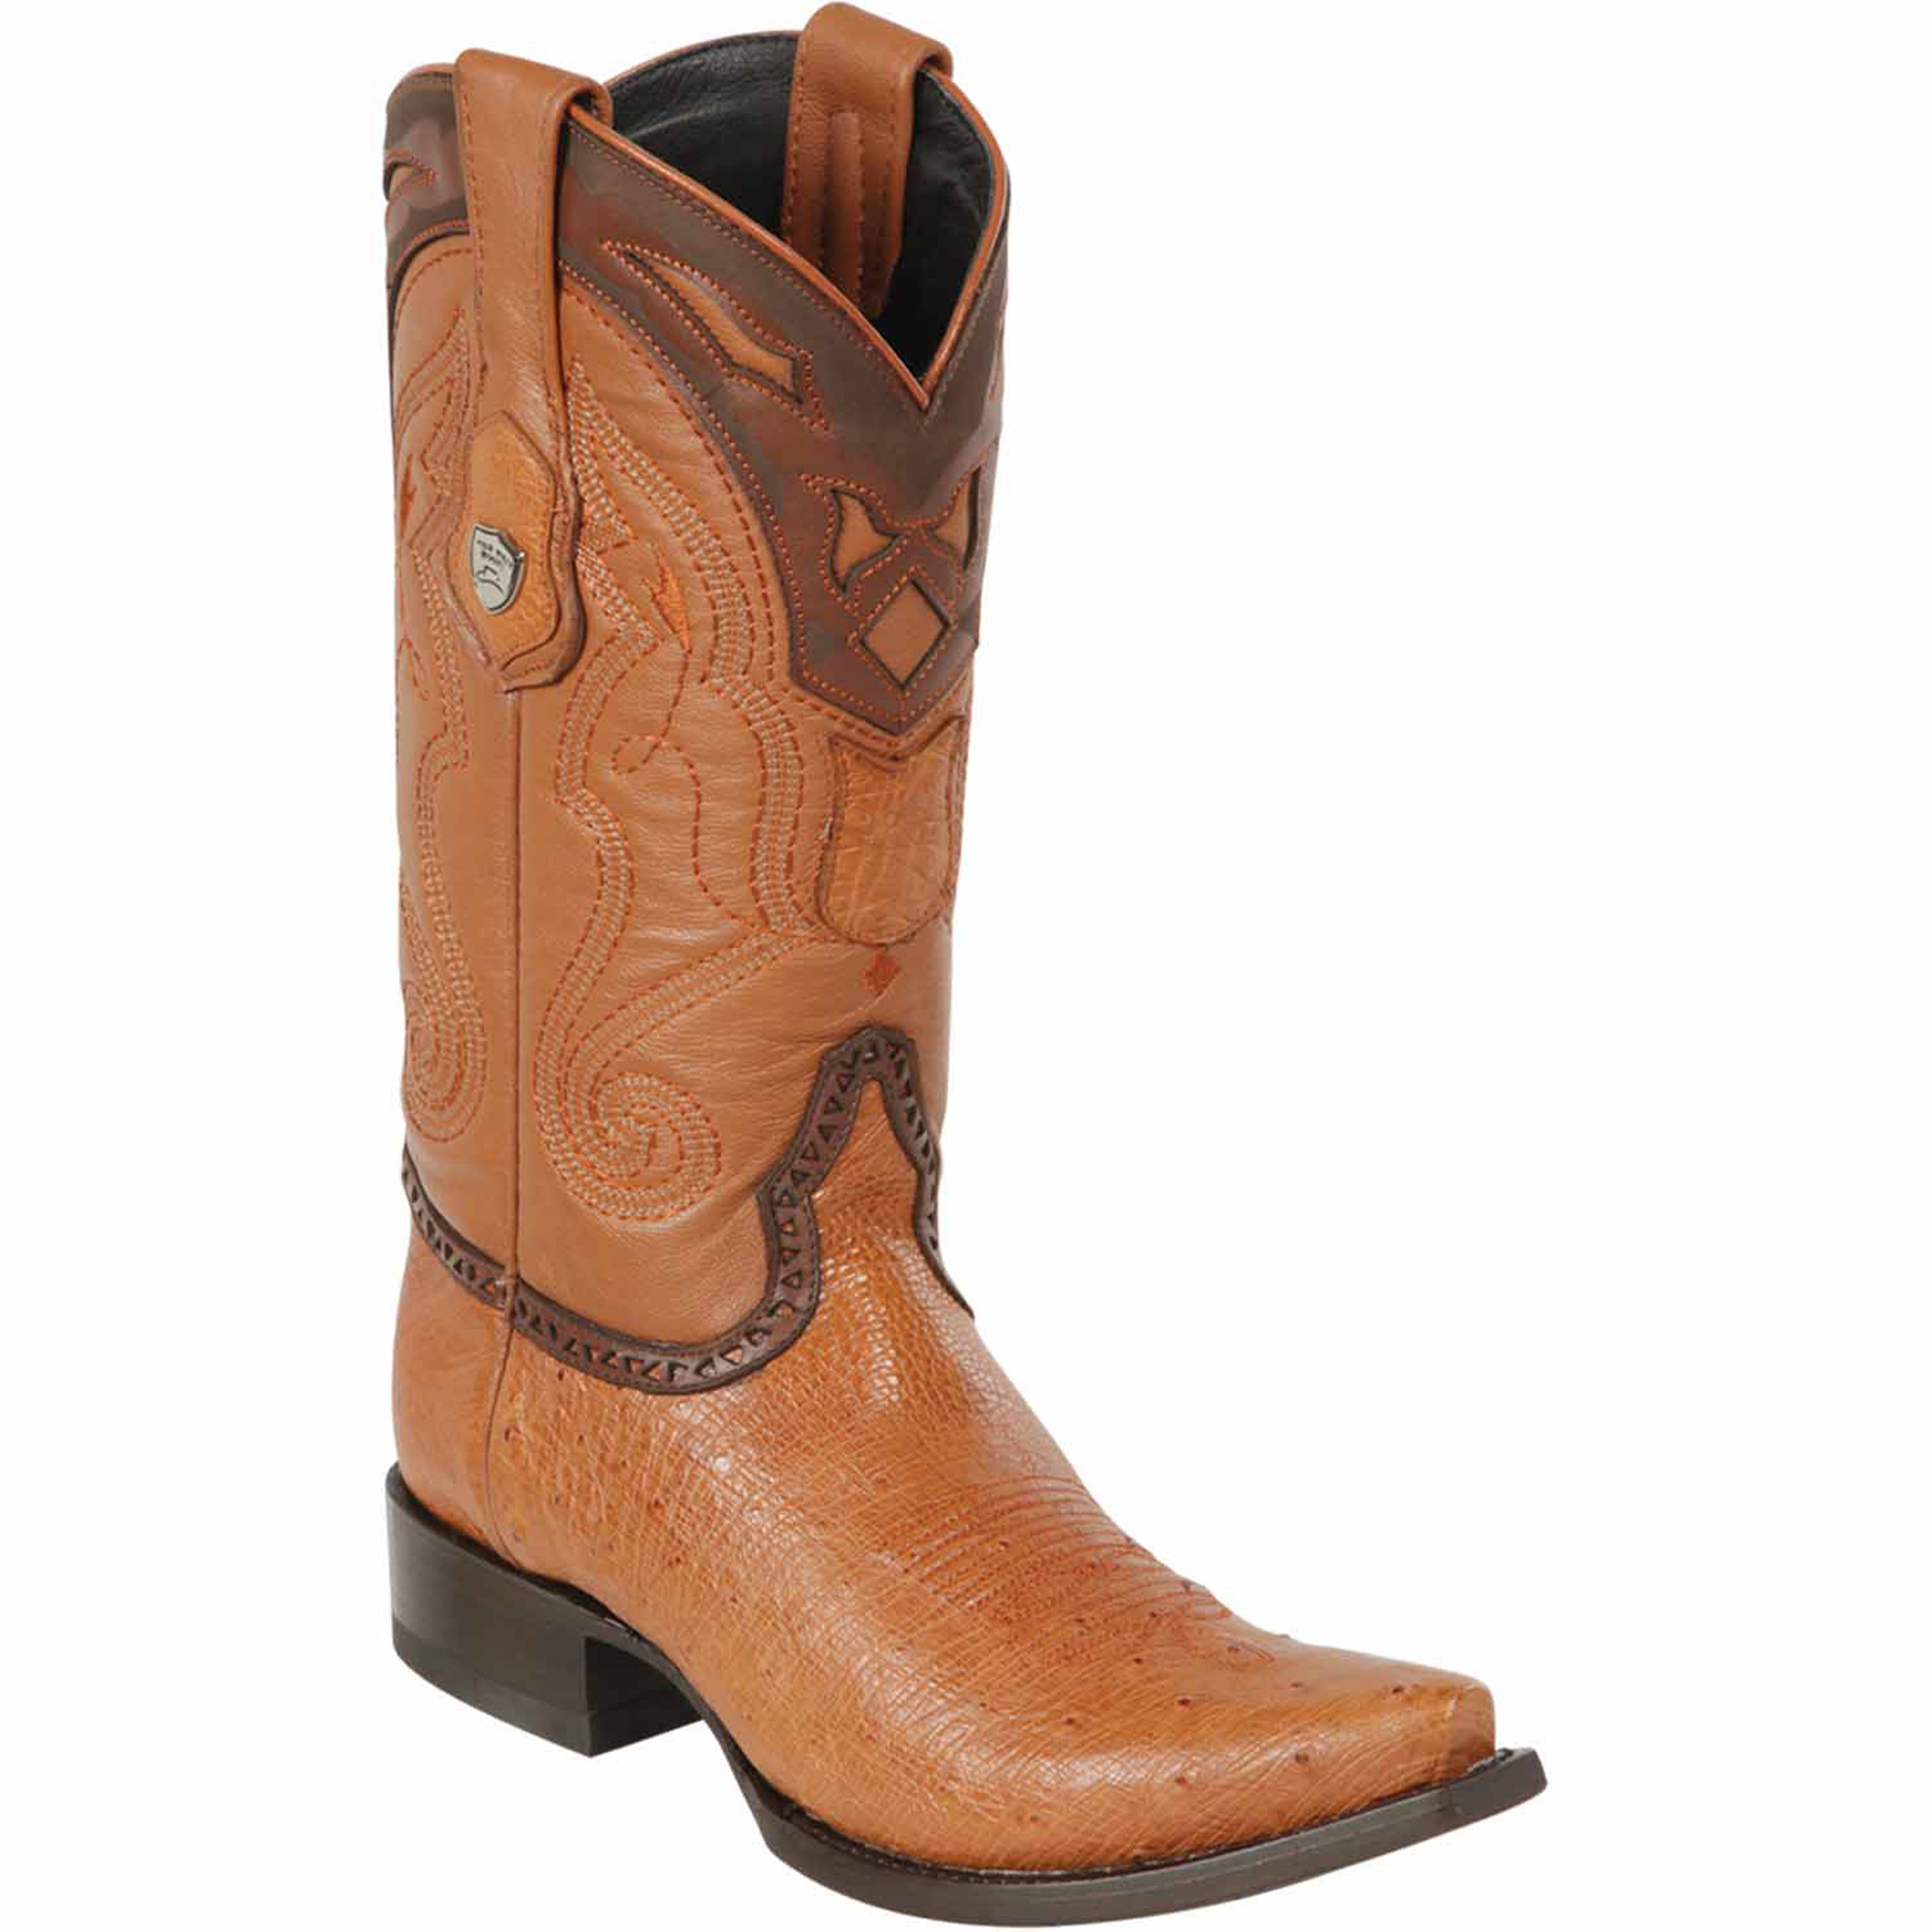 Canada West Bullrider Grand Canyon Pointed Toe Cowboy Boot 6903 - Width 3E